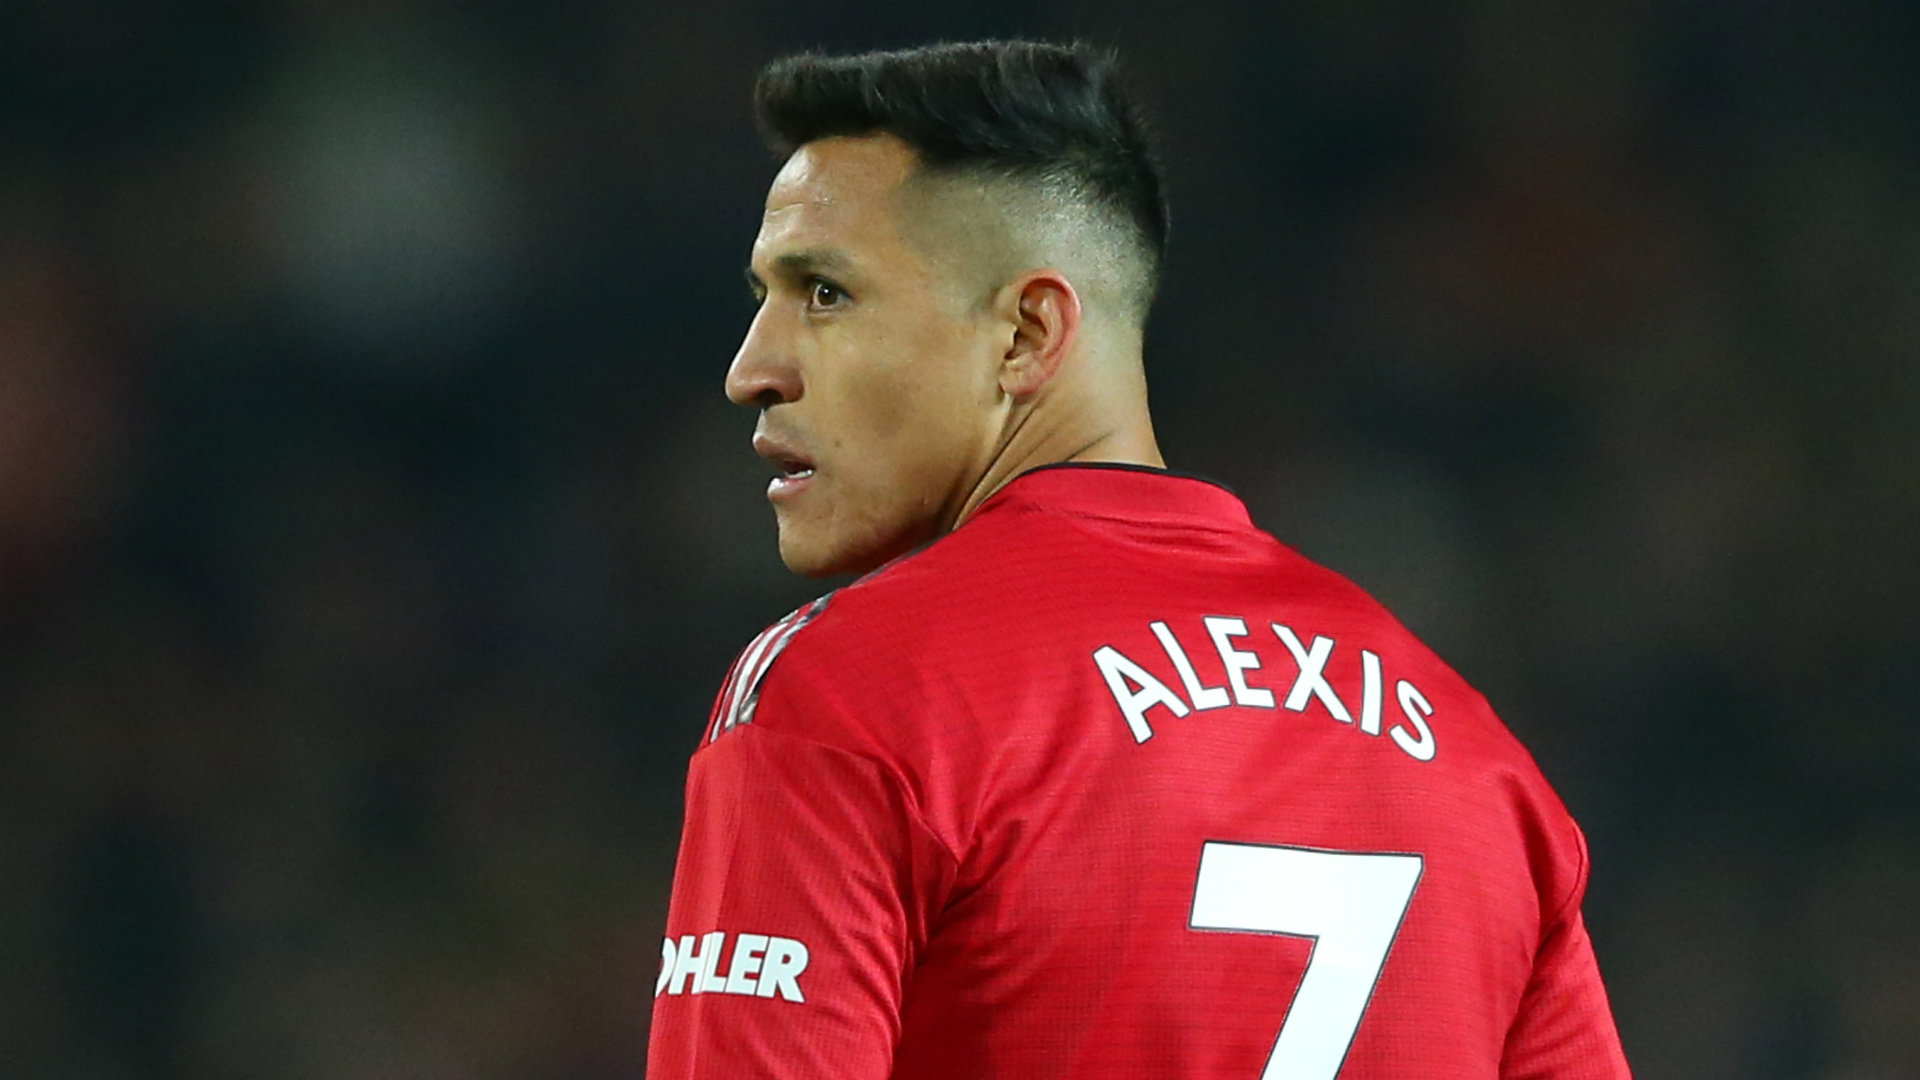 ‘Alexis Sanchez will be wishing he’d gone to Man City’ – United switch always a ‘mistake’, says Ince